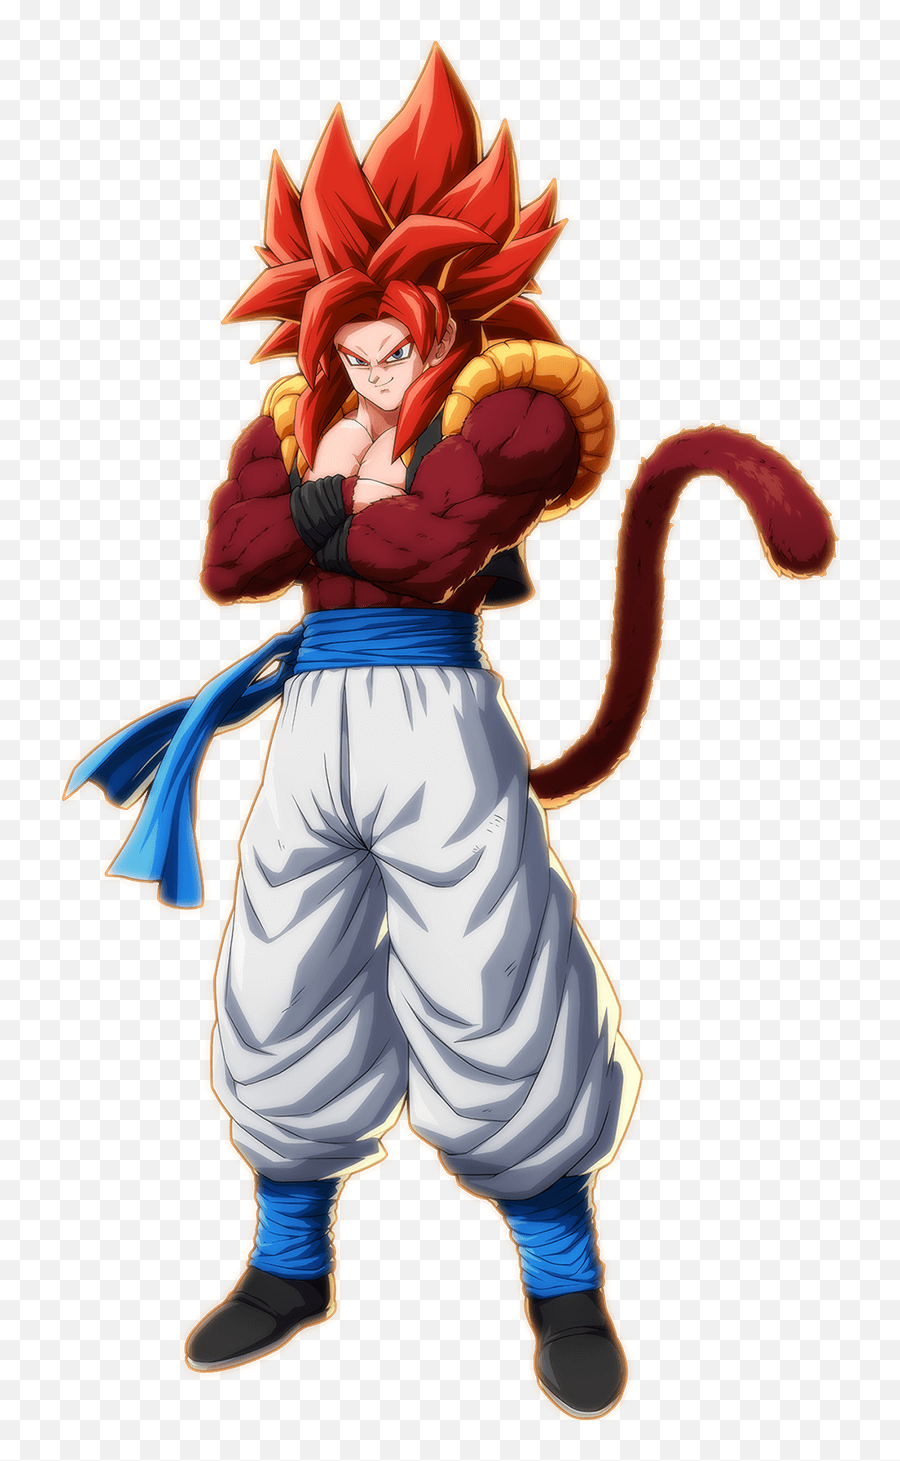 Official Render And Icon For Ssj4 Gogeta Rdragonballfighterz - Dragon Ball Fighterz Gogeta Ssj4 Png,Knight Icon Anime